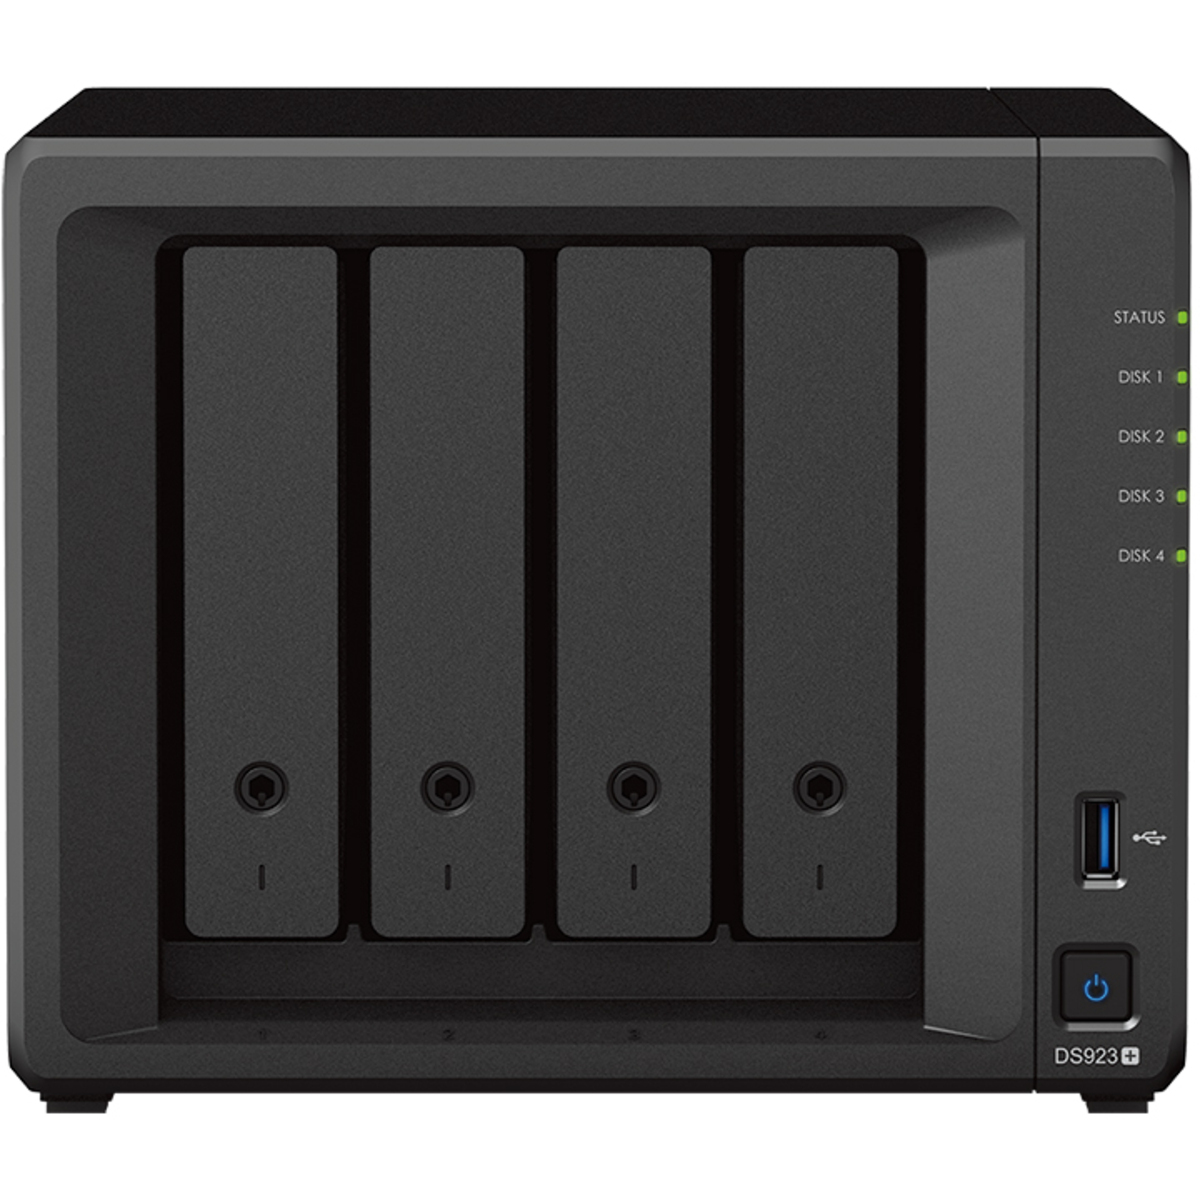 buy Synology DiskStation DS923+ 48tb Desktop NAS - Network Attached Storage Device 4x12000gb Seagate IronWolf Pro ST12000NT001 3.5 7200rpm SATA 6Gb/s HDD NAS Class Drives Installed - Burn-In Tested - ON SALE - FREE RAM UPGRADE - nas headquarters buy network attached storage server device das new raid-5 free shipping simply usa christmas holiday black friday cyber monday week sale happening now! DiskStation DS923+